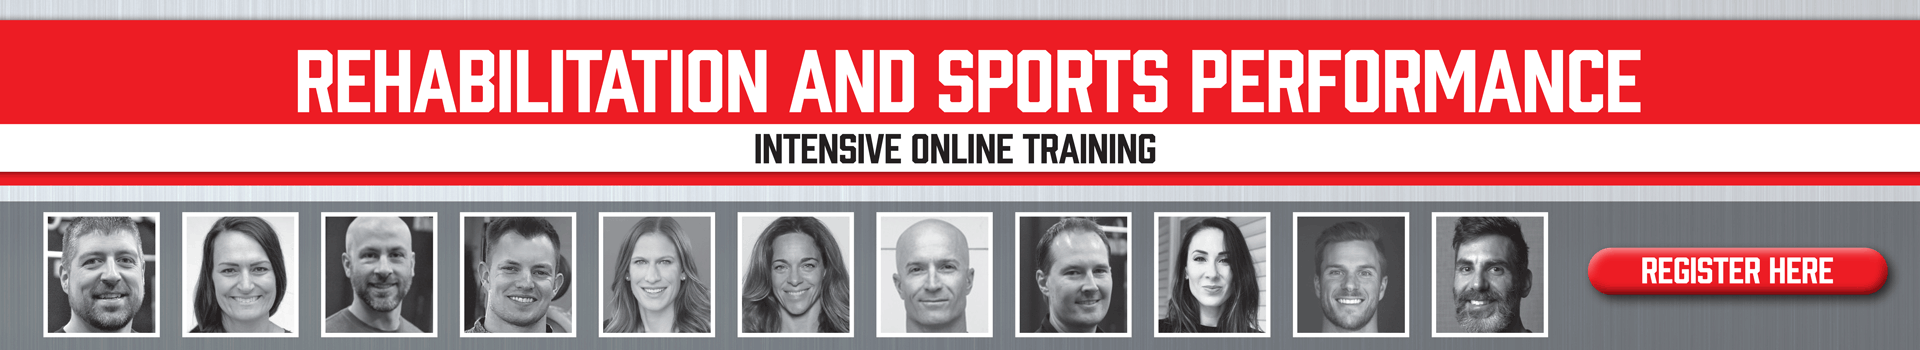 Rehabilitation and Sports Performance Intensive Online Training